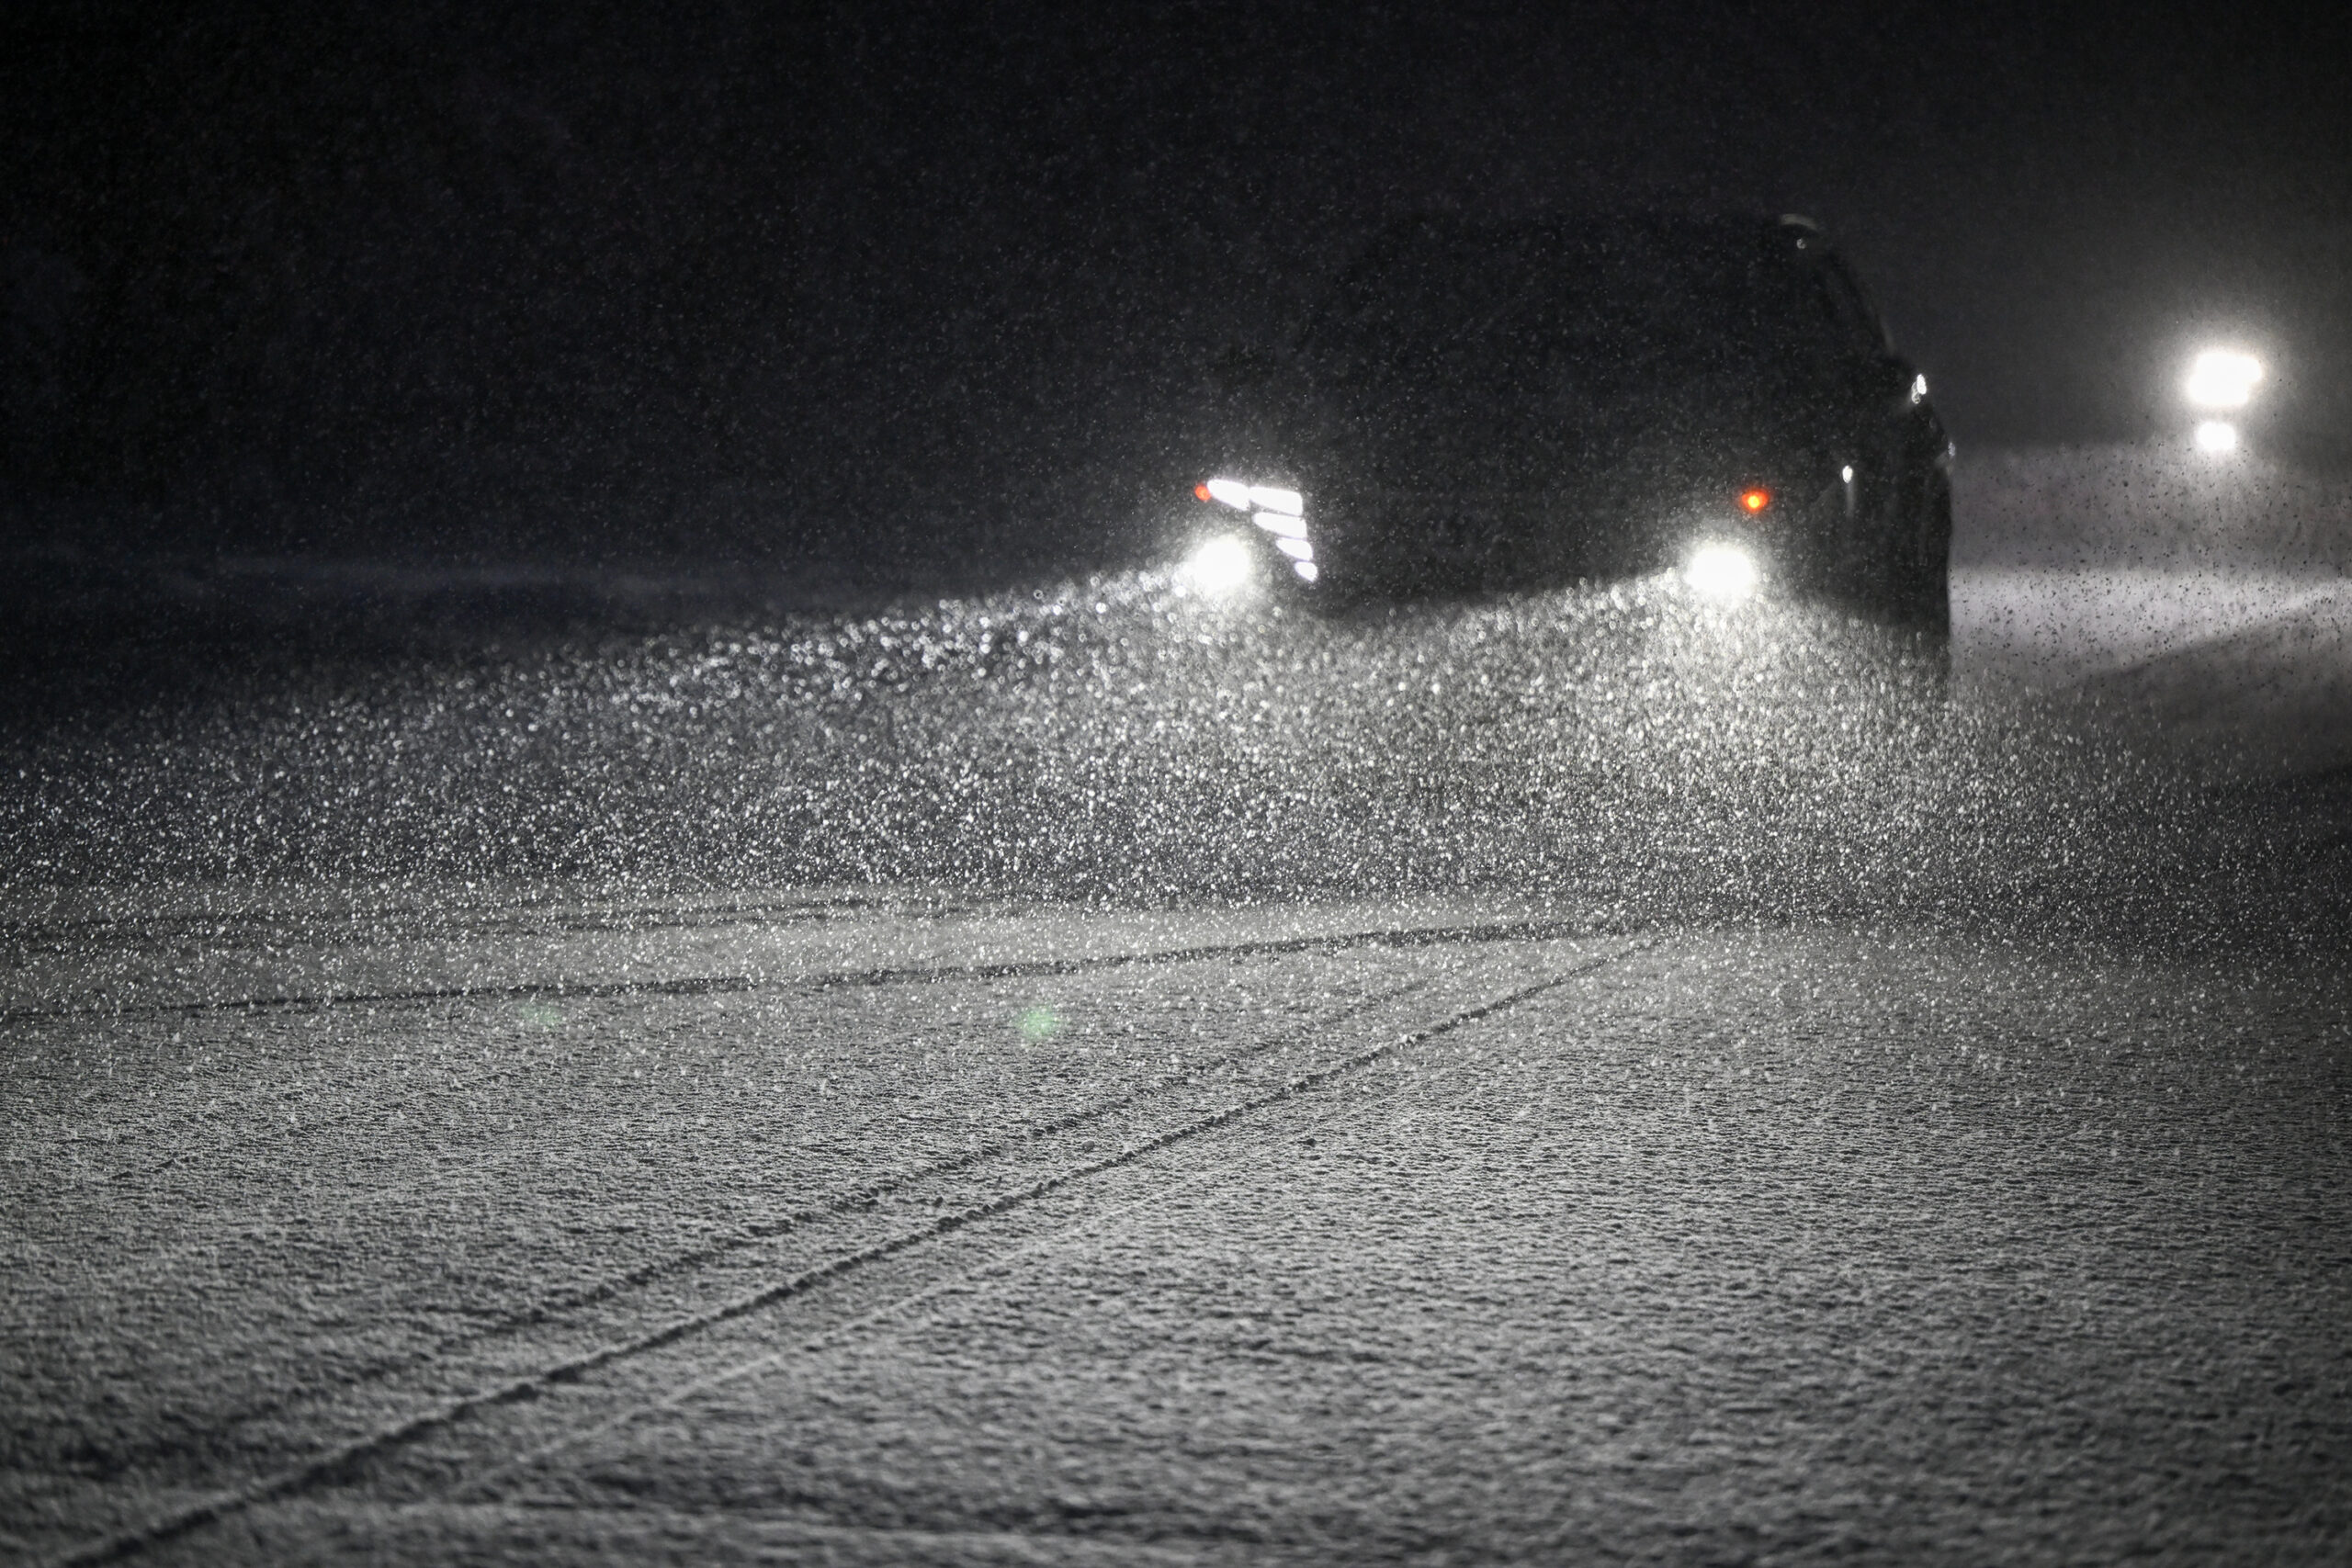 A car driving at night on a snowy road, with headlights reflecting off raindrops.